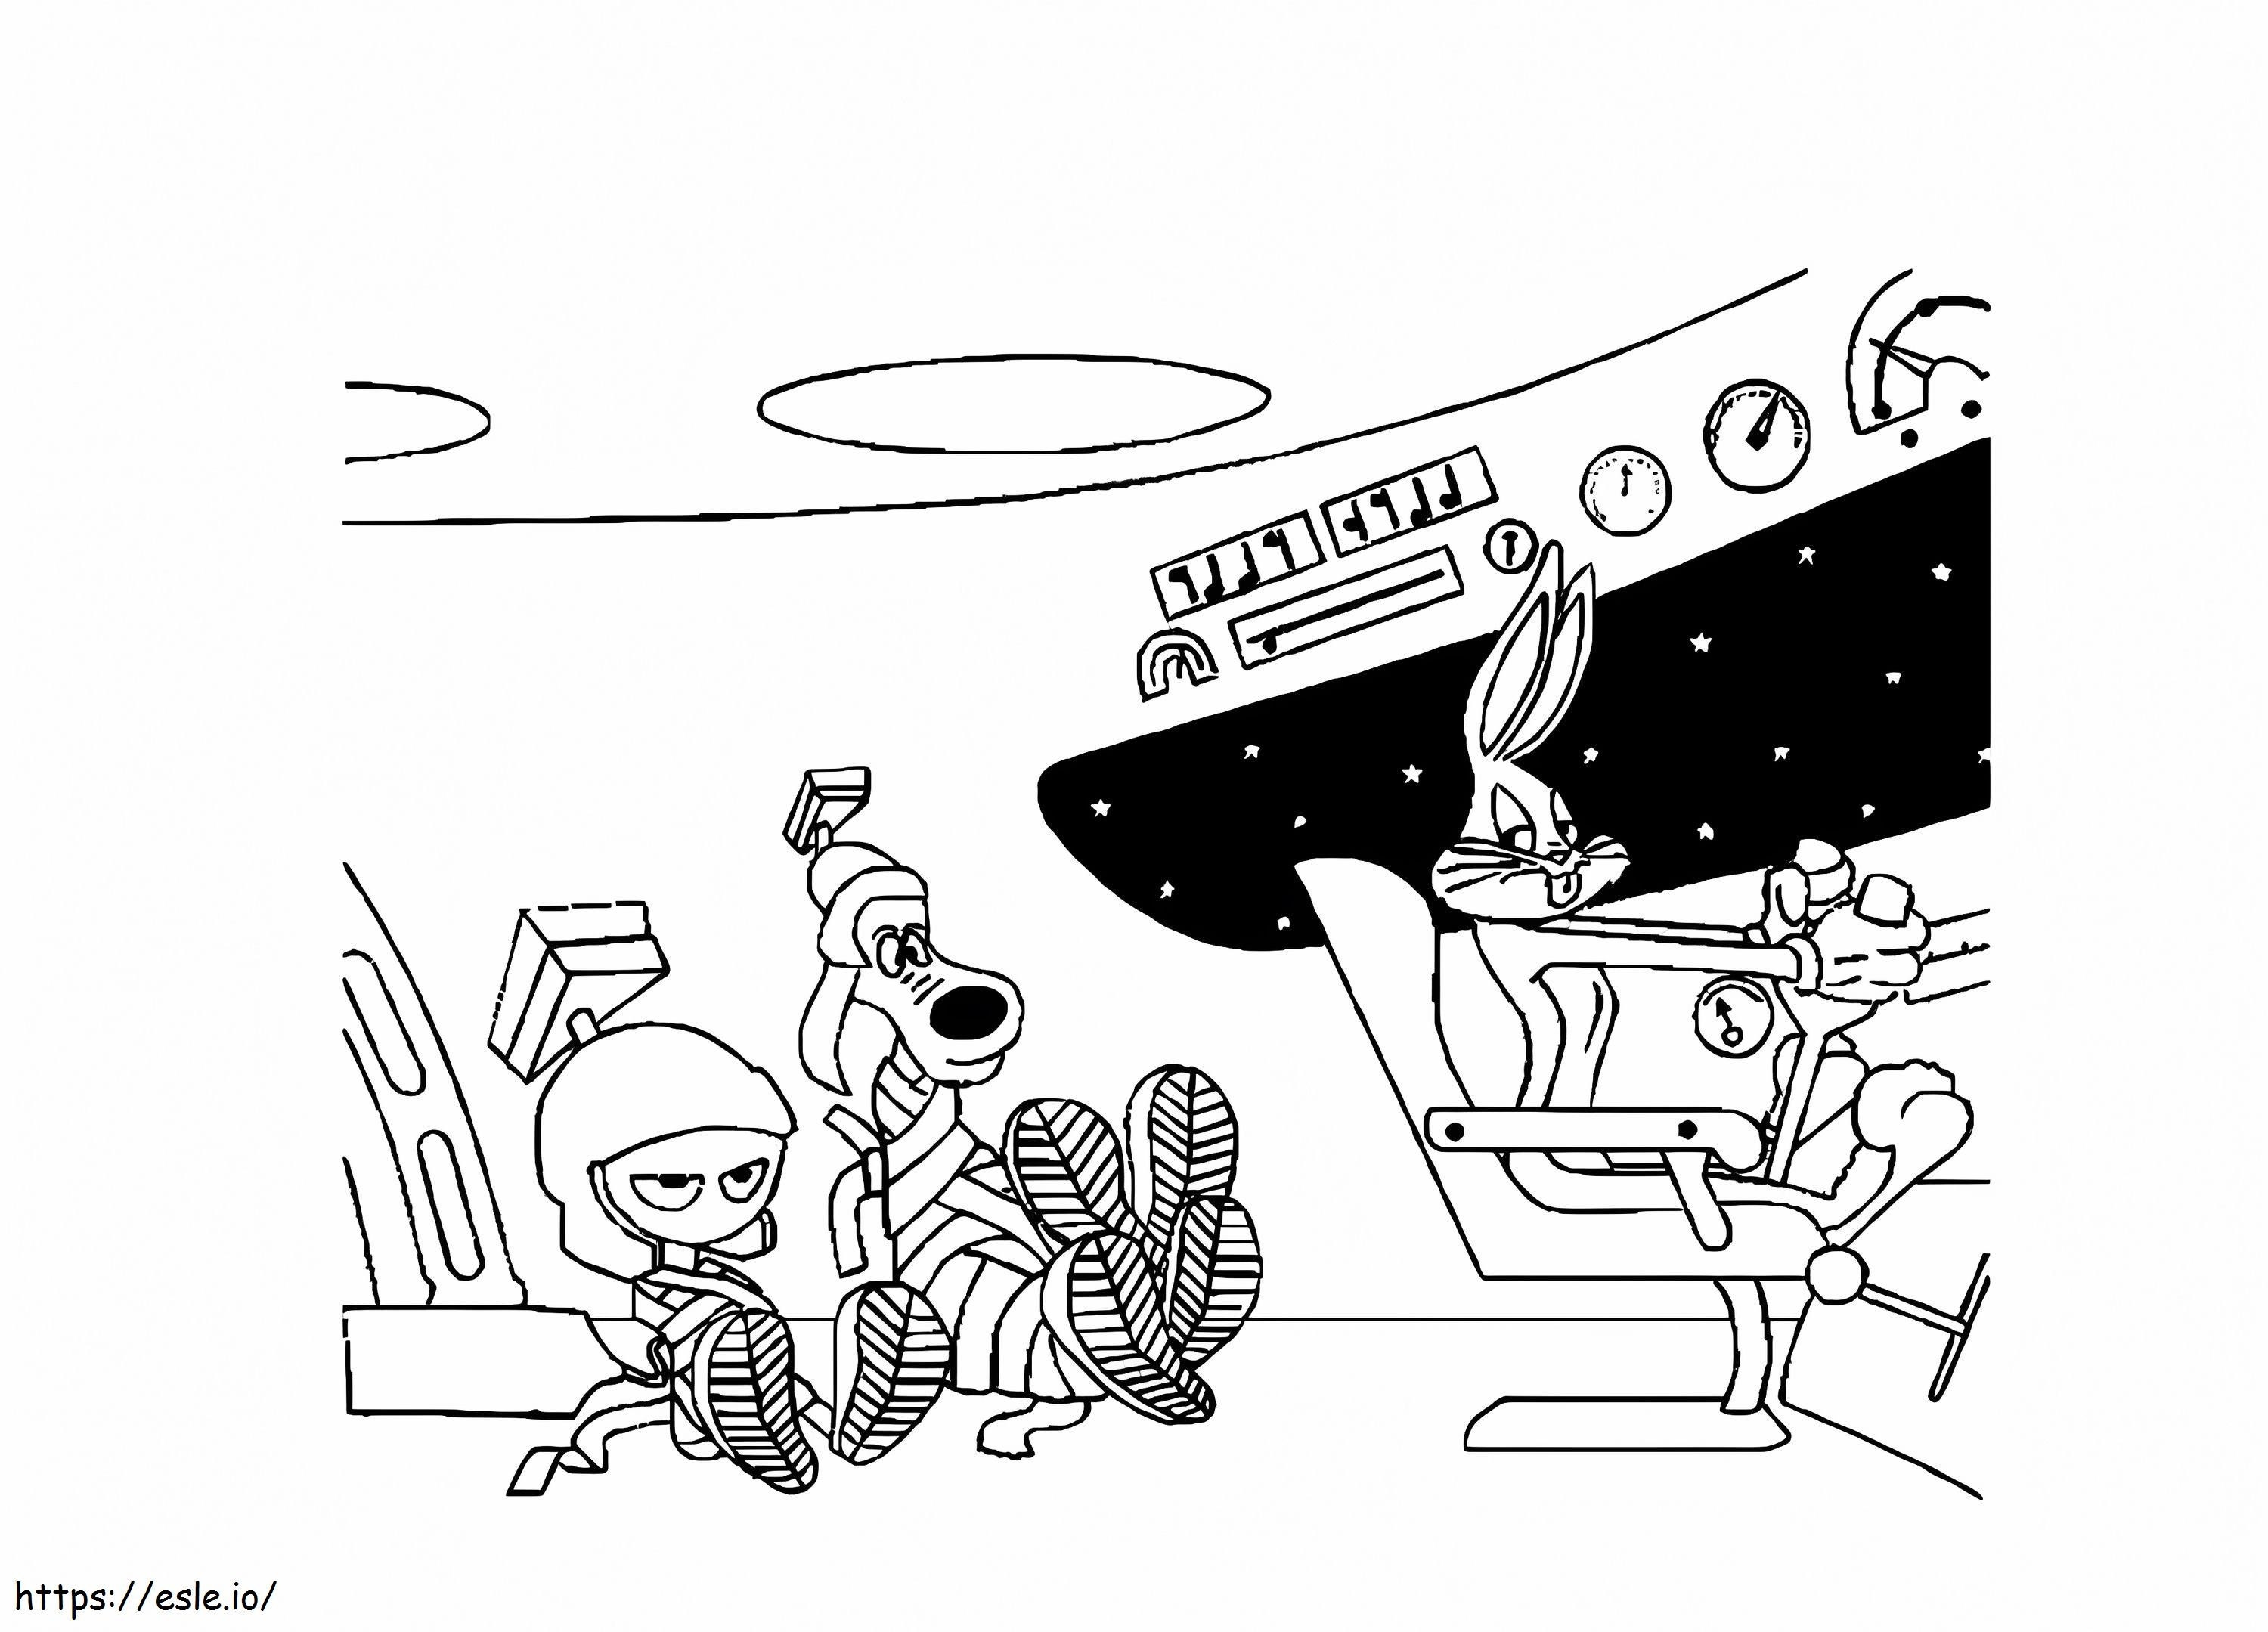 Marvin The Martian 5 coloring page